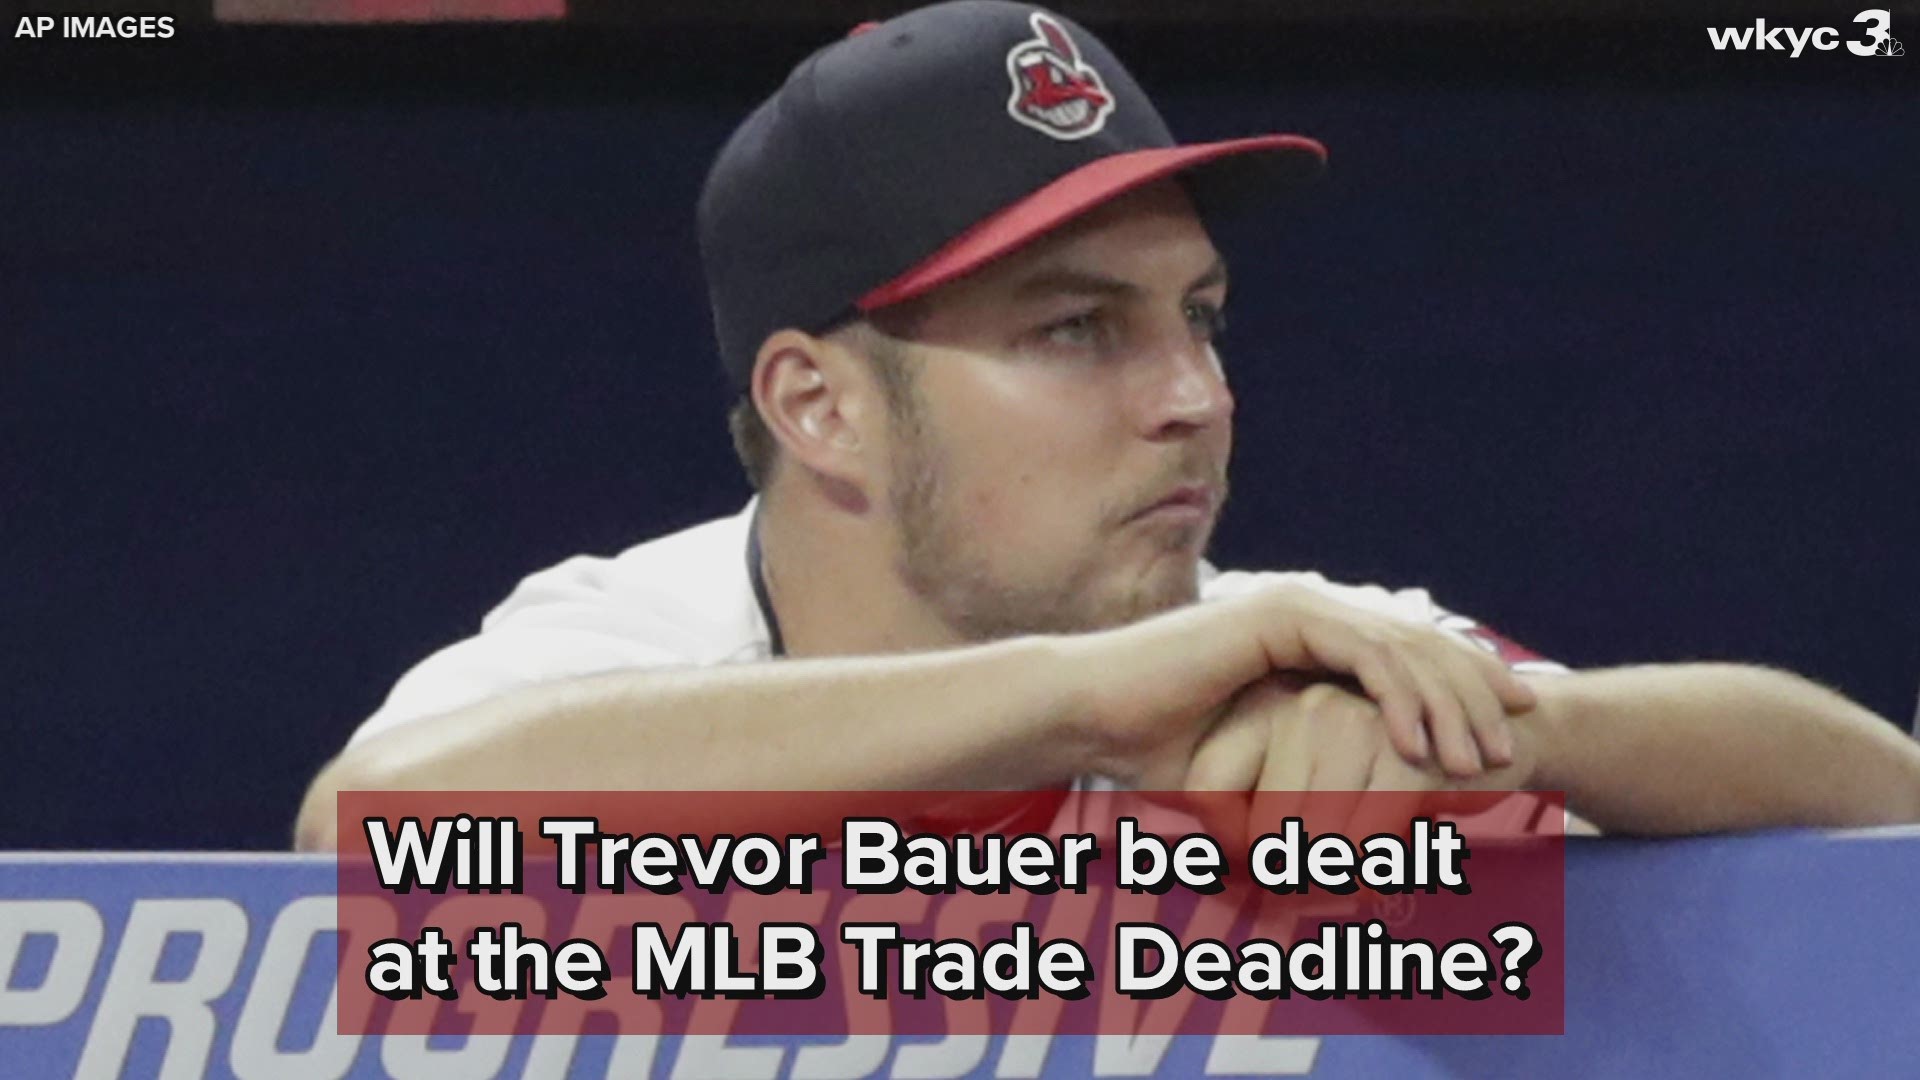 According to ESPN's Jeff Passan, teams around MLB are skeptical the Cleveland Indians will deal Trevor Bauer by the July 31 trade deadline.